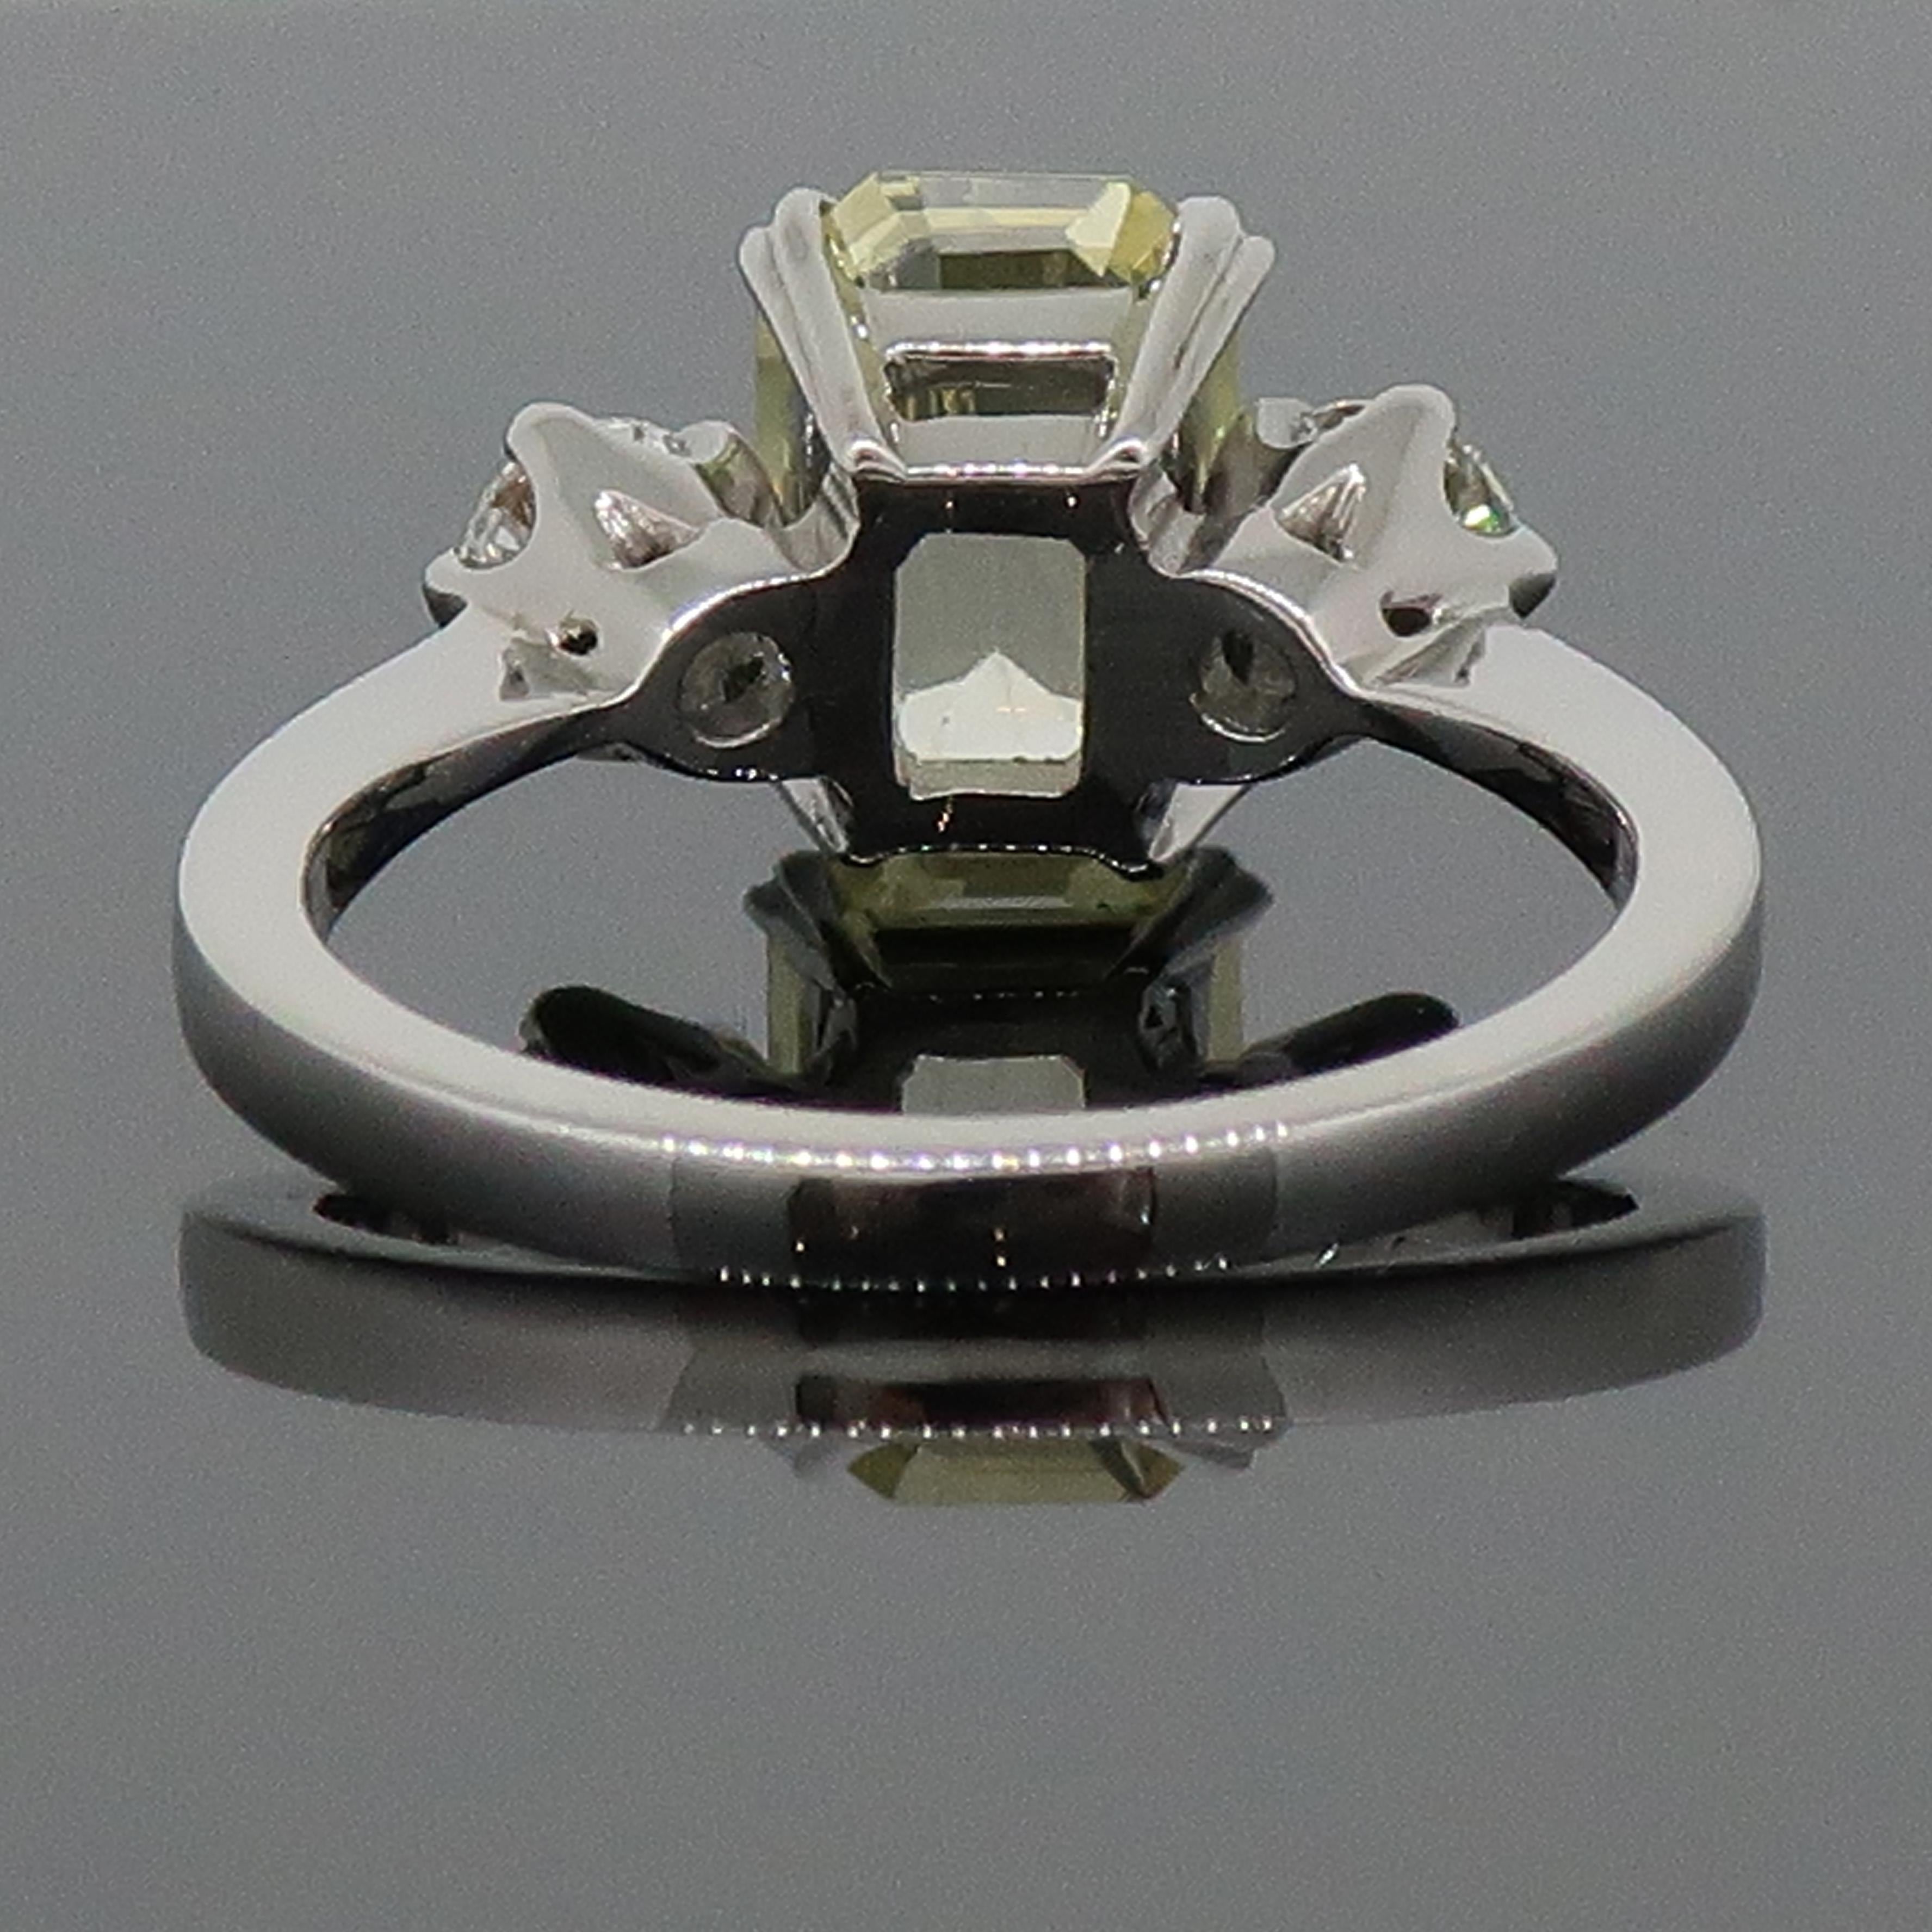 pale yellow sapphire ring